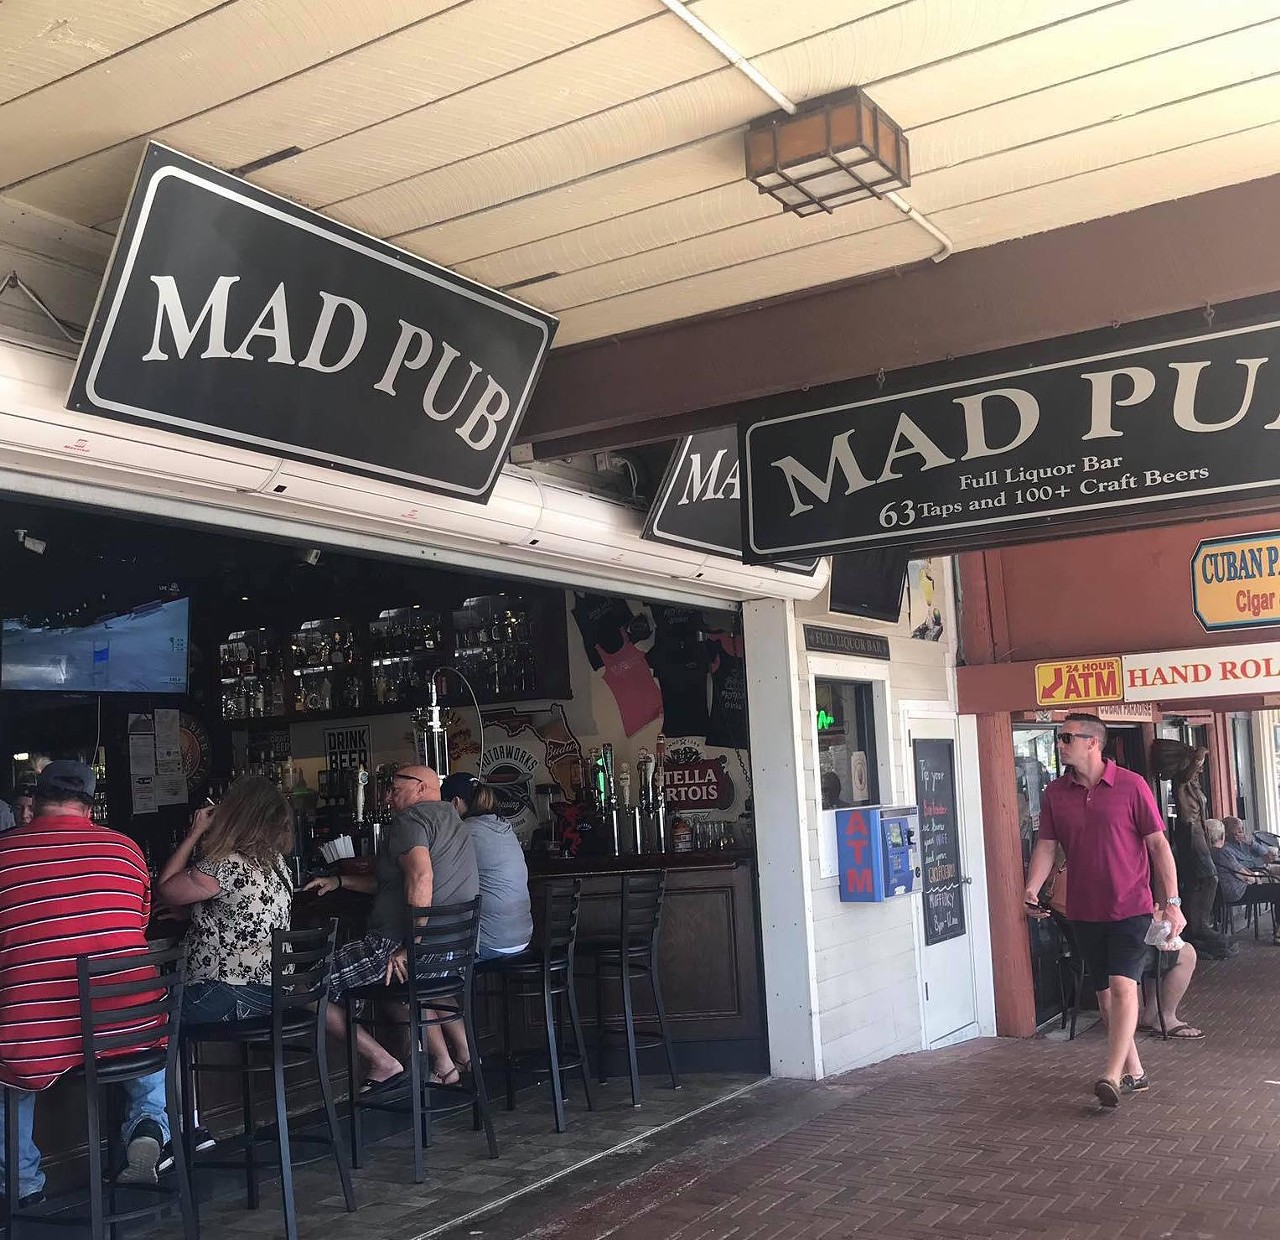 Mad Pub  
12933 Village Blvd, Madeira Beach, FL 33708 ,  (727) 397-7693 
Mad Pub is an open air bar right off the beach, that looks too inviting to pass up after a day in the sun. With a variety of craft beers and a friendly staff, Mad Pub doesn't necessarily have the expected "dive bar" prices, and it doesn&#146;t have the dinghy demeanor or inside smoking like most dives do either. 
Photo via  Mad Pub/Facebook